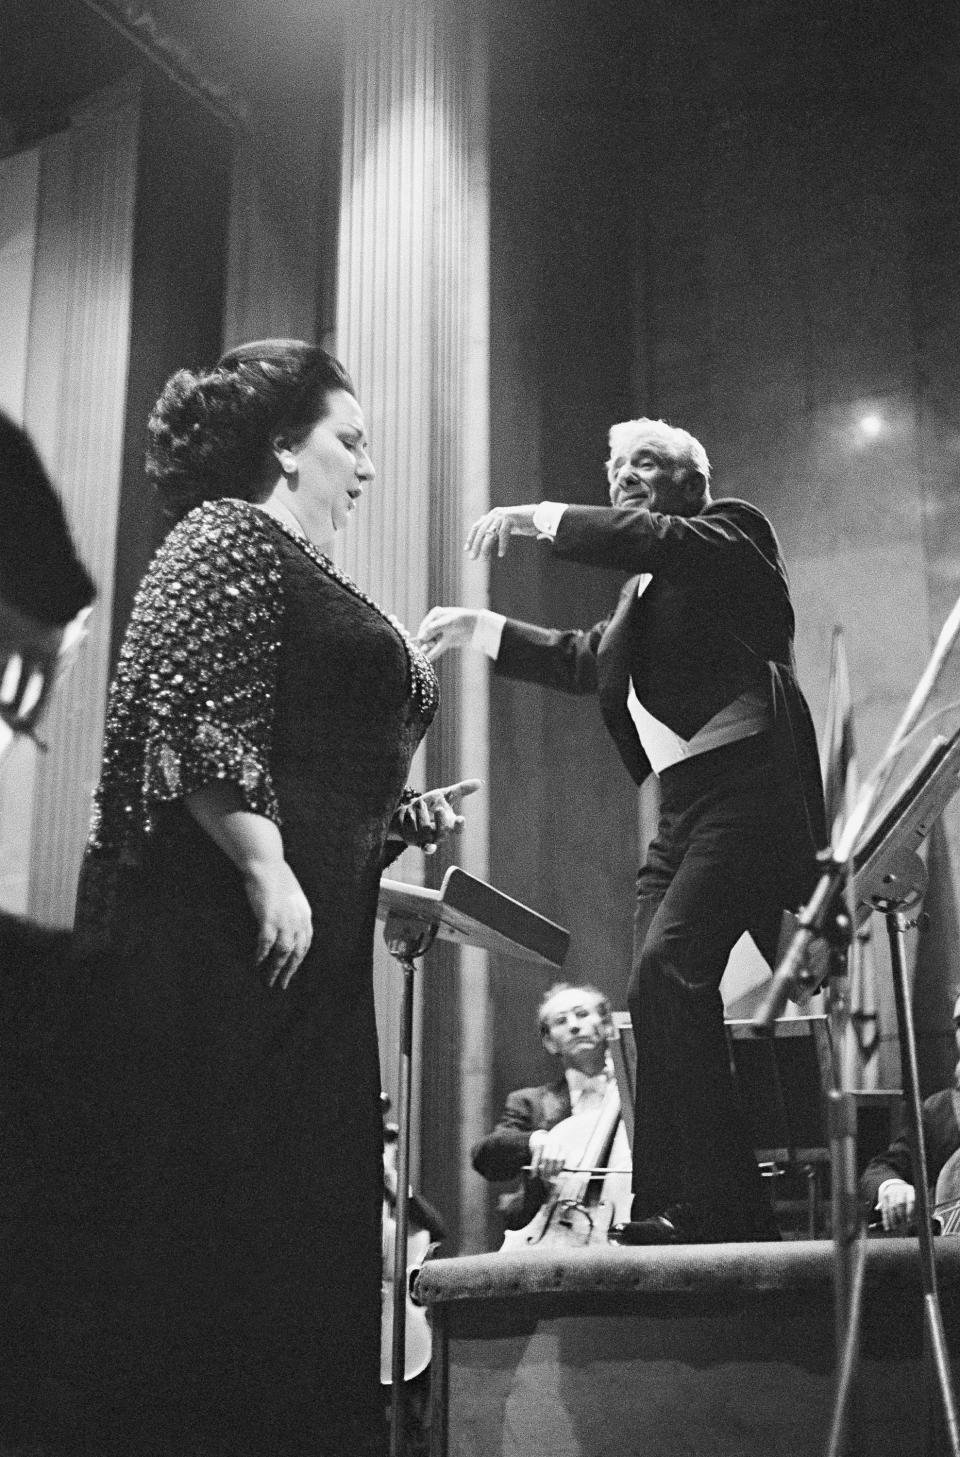 FILE - In this May 5, 1977 file photo, together for the first time on stage, American conductor Leonard Bernstein, right, at the head of the French National Orchestra and Spanish cantatrice Montserrat Caballe during the gala concert for the benefit of cancer research at the Champs-Elysees theater in Paris. Spanish opera diva Montserrat Caballe, renowned for her bel canto technique and her interpretations of the roles of Rossini, Bellini and Donizetti, has died. She was 85. Hospital Sant Pau press officer Abraham del Moral confirmed her passing away early on Saturday Oct. 6, 2018. (AP Photo)